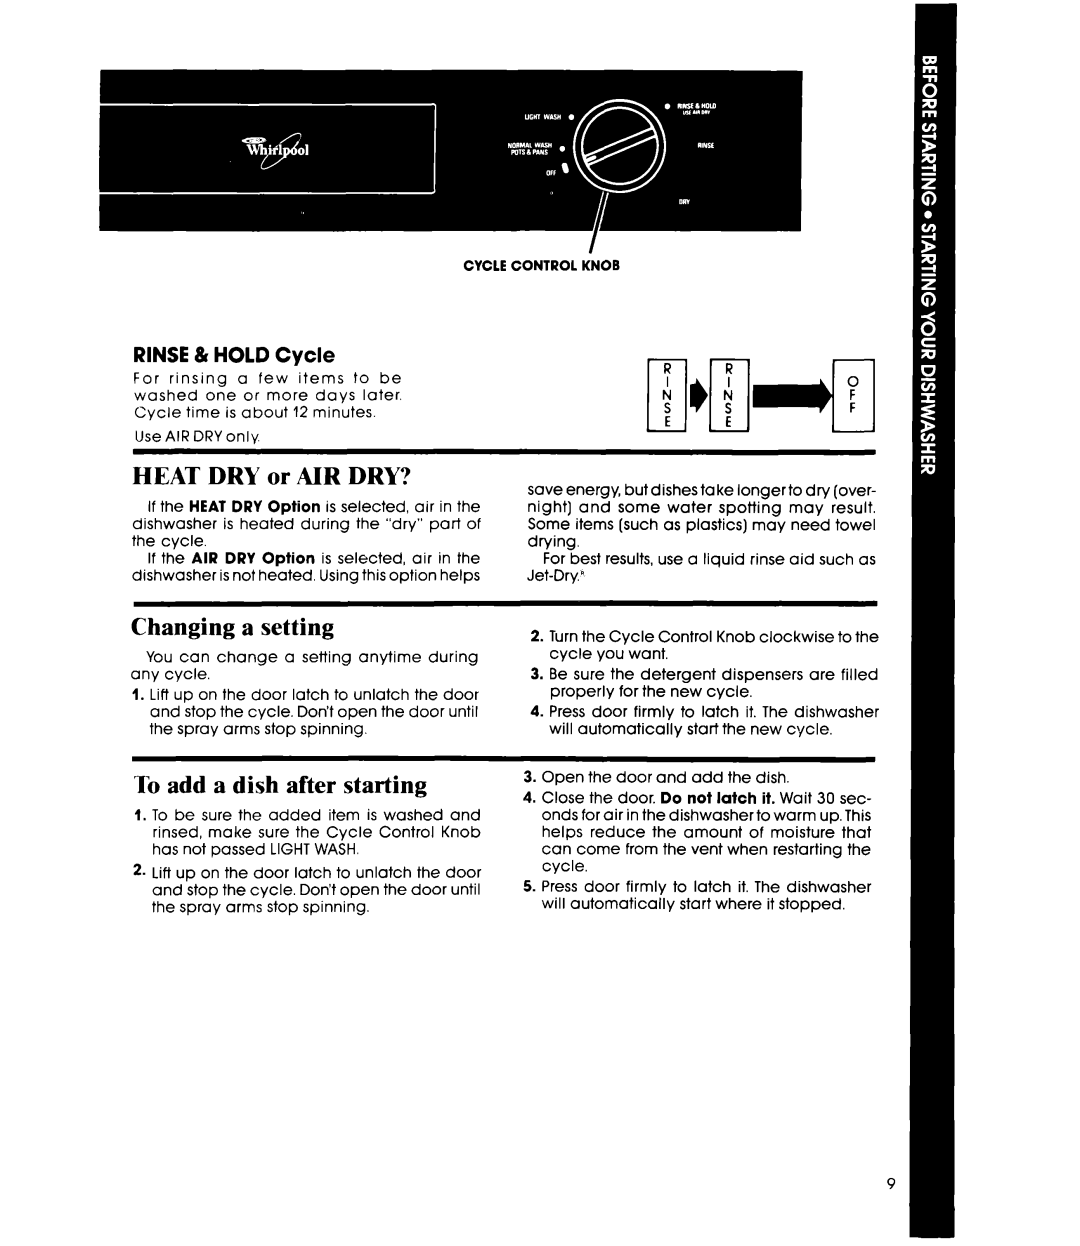 Whirlpool DU8350XT manual HEAT DRY or AIR DRY?, Changing a setting, To add a dish after starting, RINSE & HOLD Cycle 